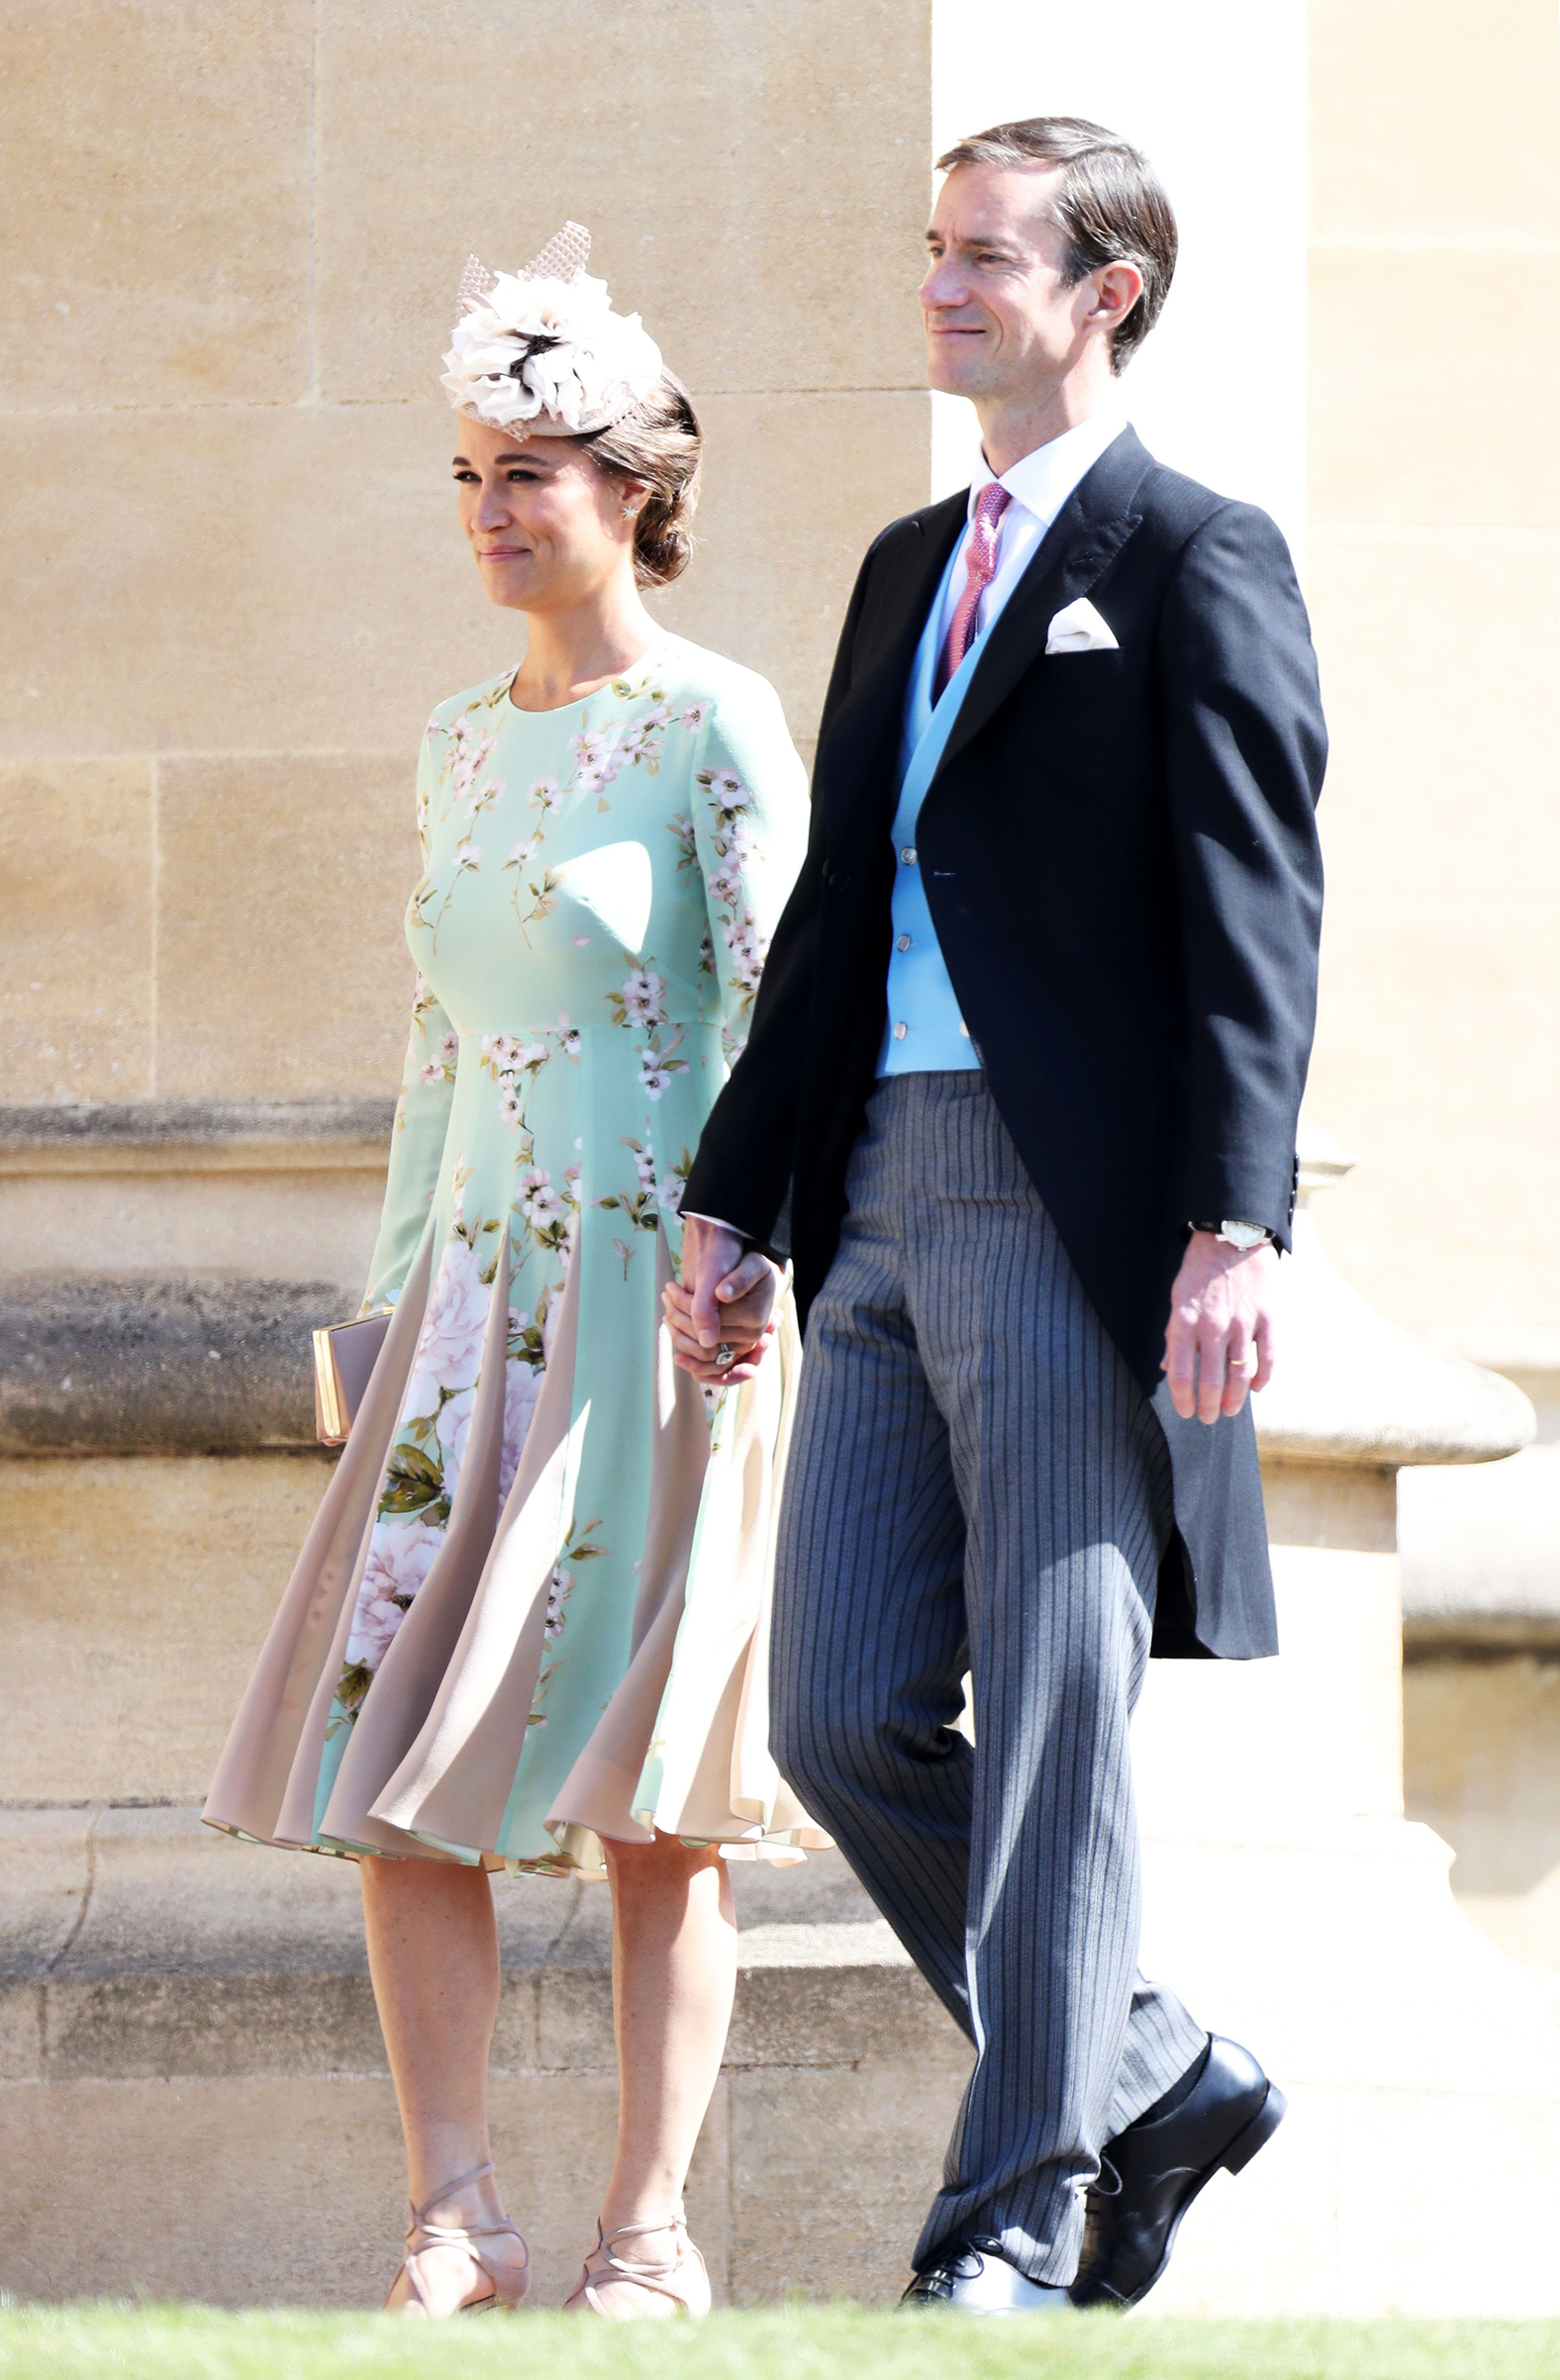 Pippa Middleton and James Matthews arrive at the wedding of Prince Harry and Meghan Markle at St George's Chapel, Windsor Castle on May 19, 2018. (Chris Jackson—Getty Images)